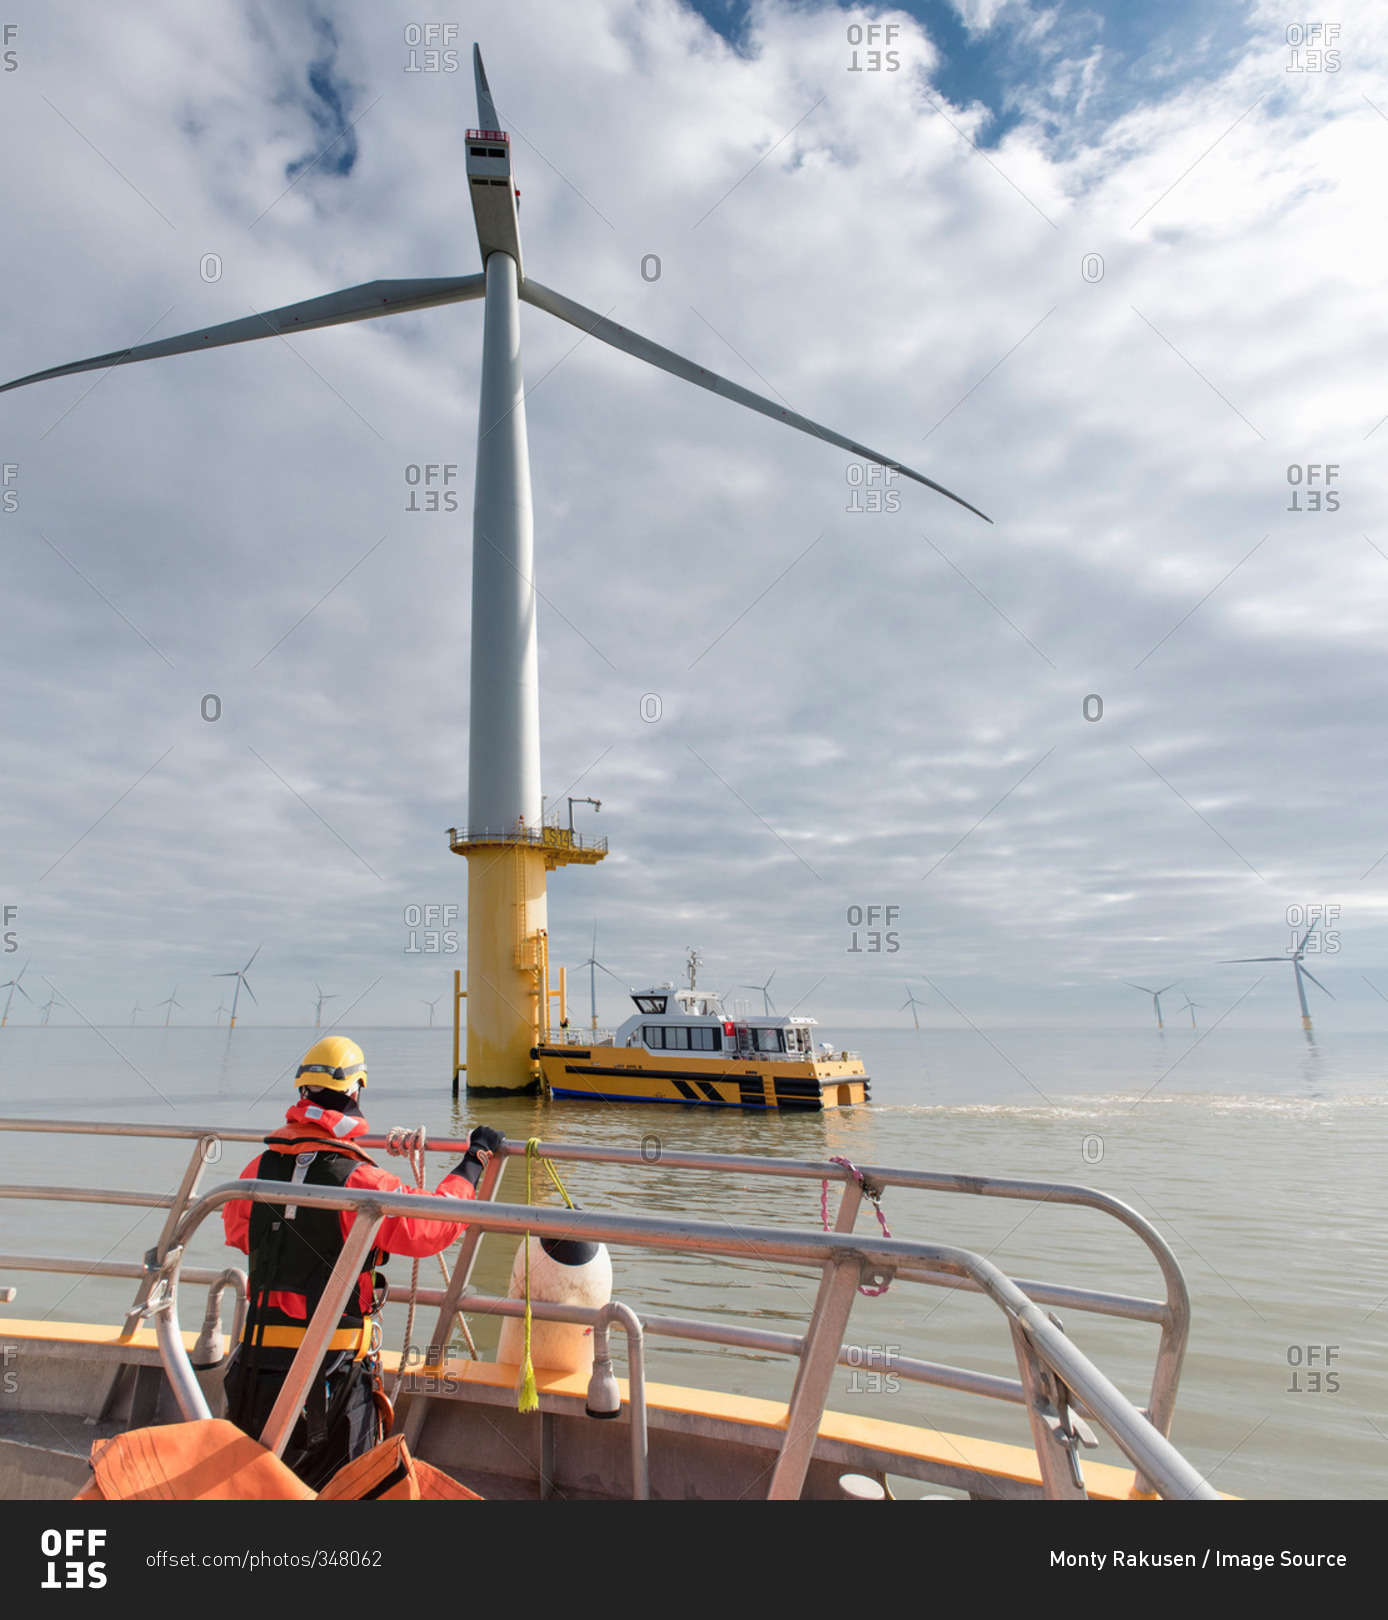 Engineer in boat at offshore windfarm turbine